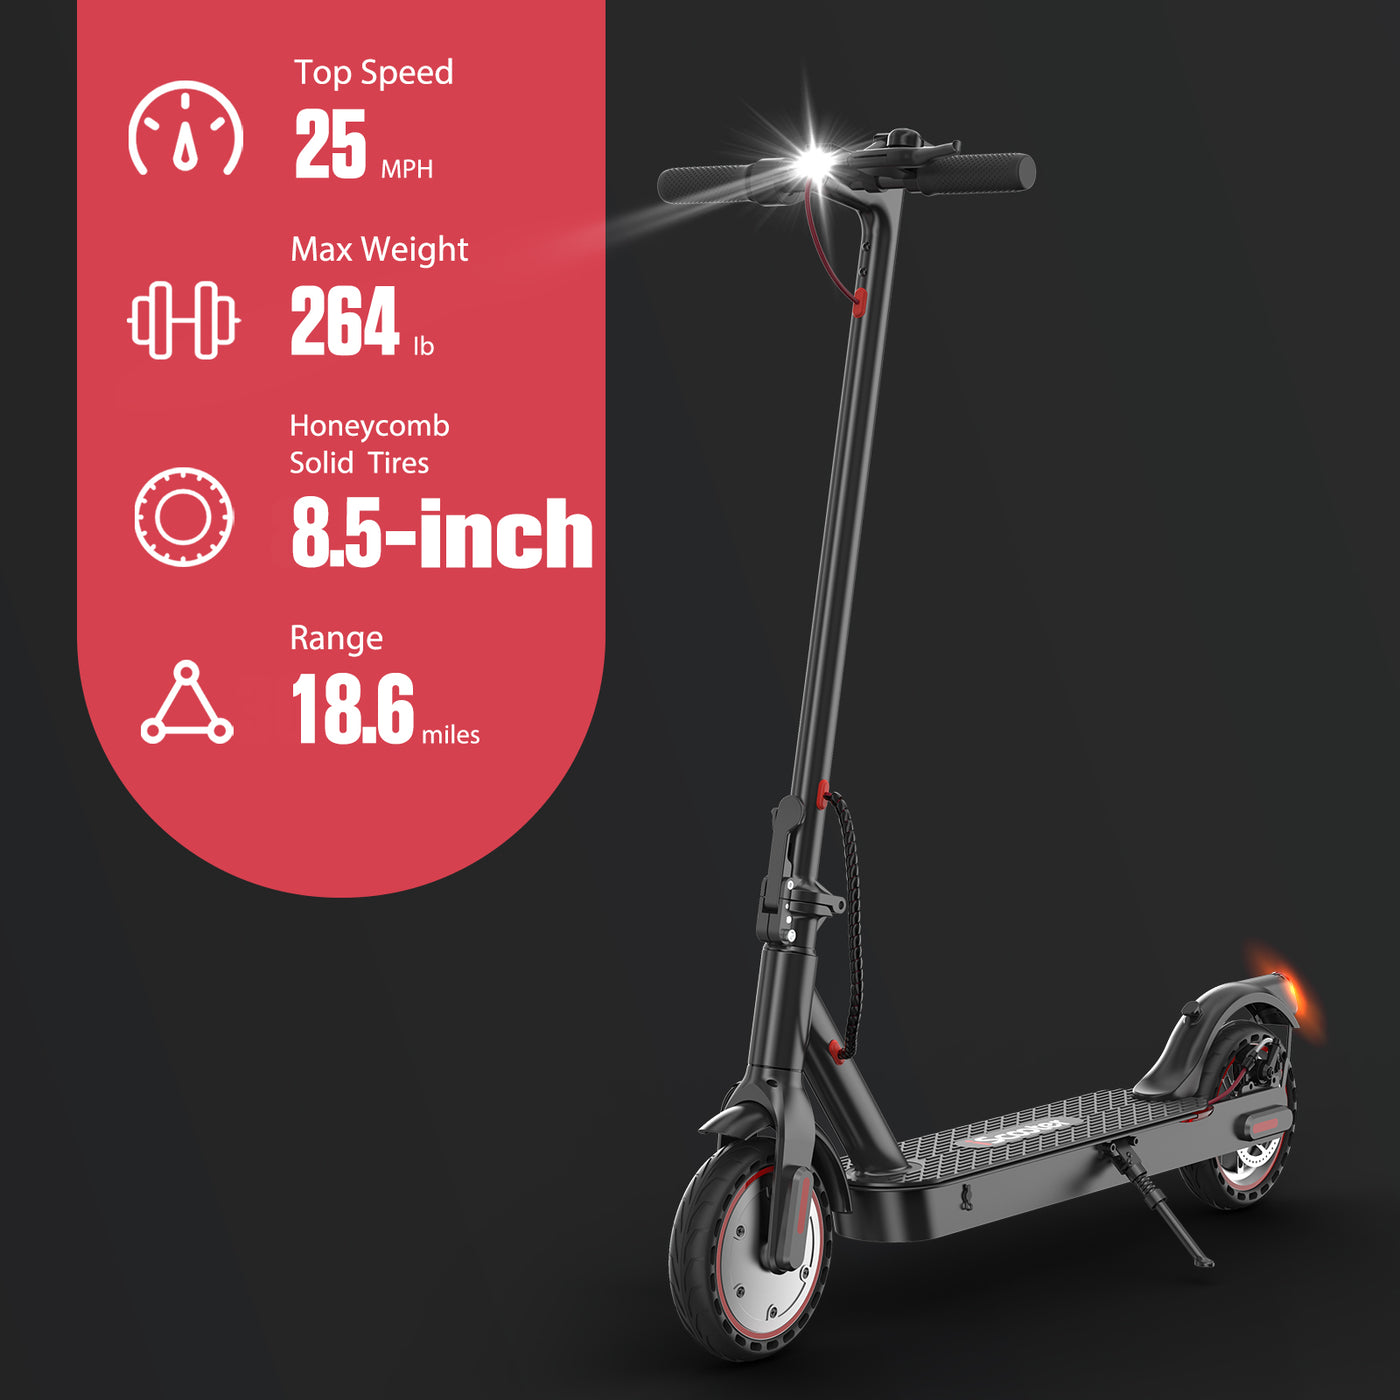 iScooter i8 Electric Scooter